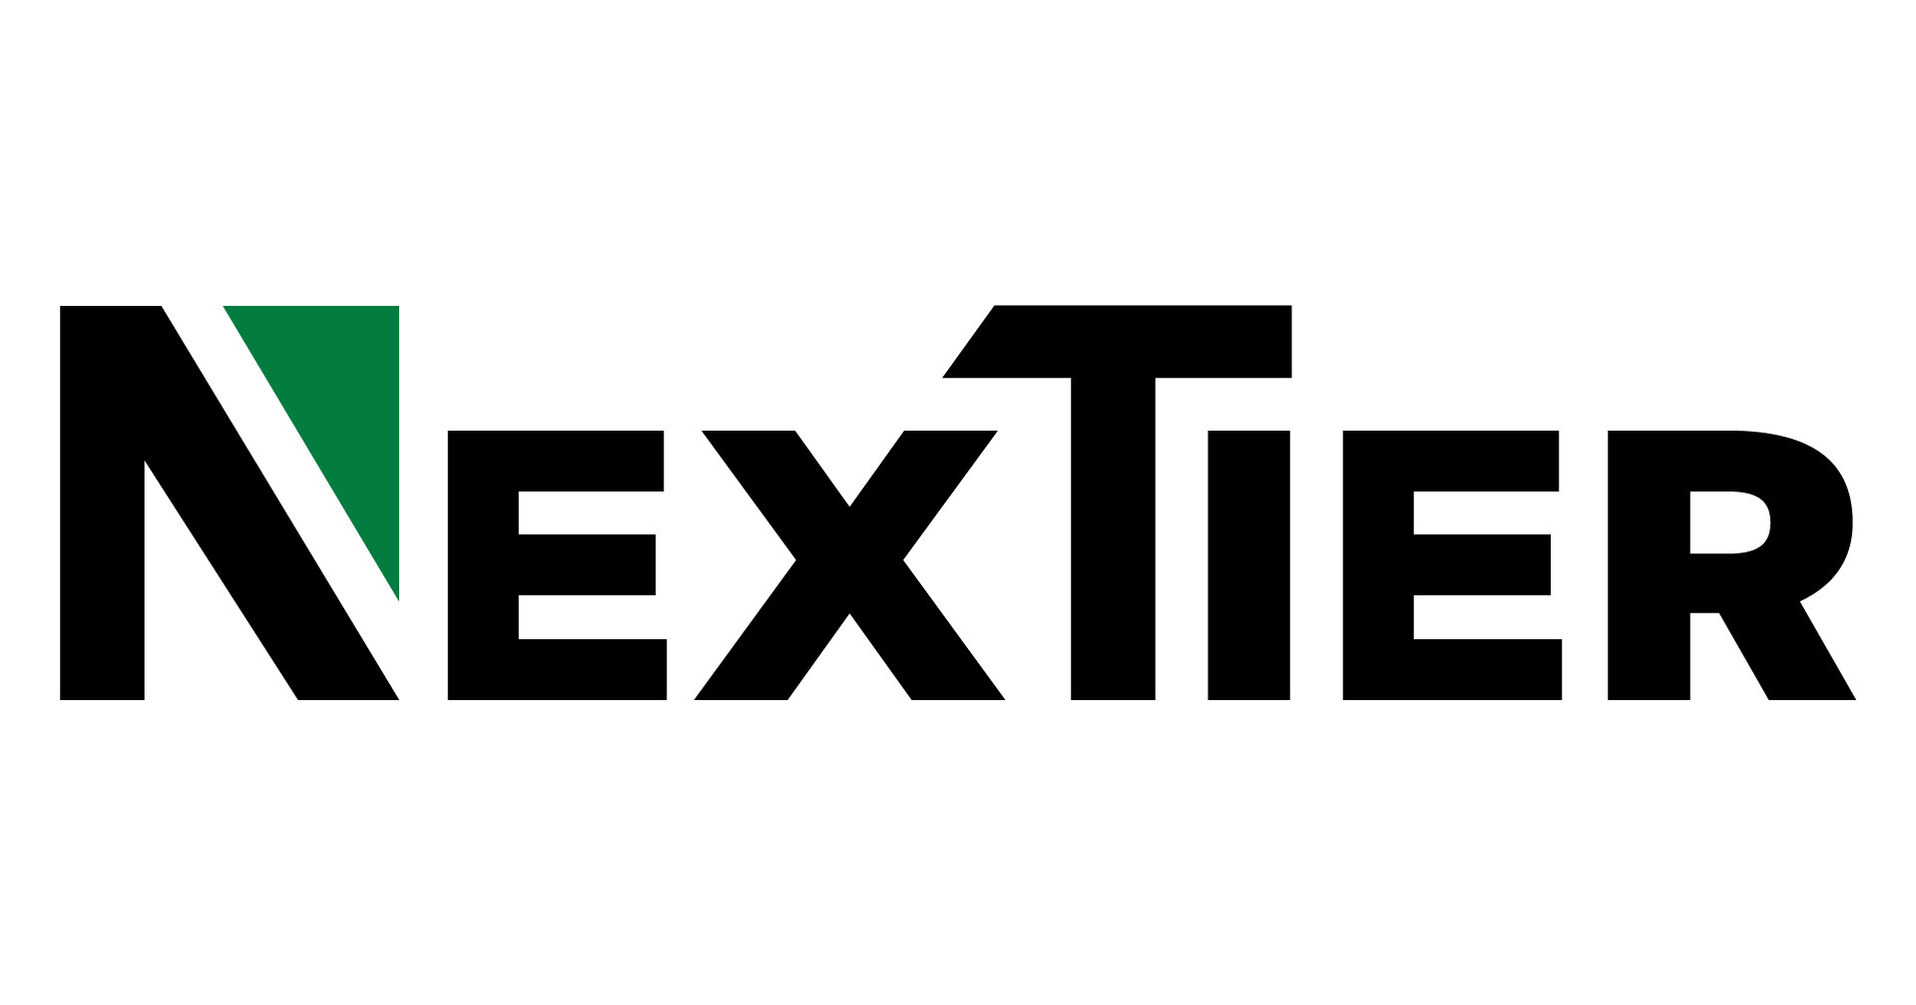  NexTier Announces Fourth Quarter and Full Year 2022 Financial and Operational Results 